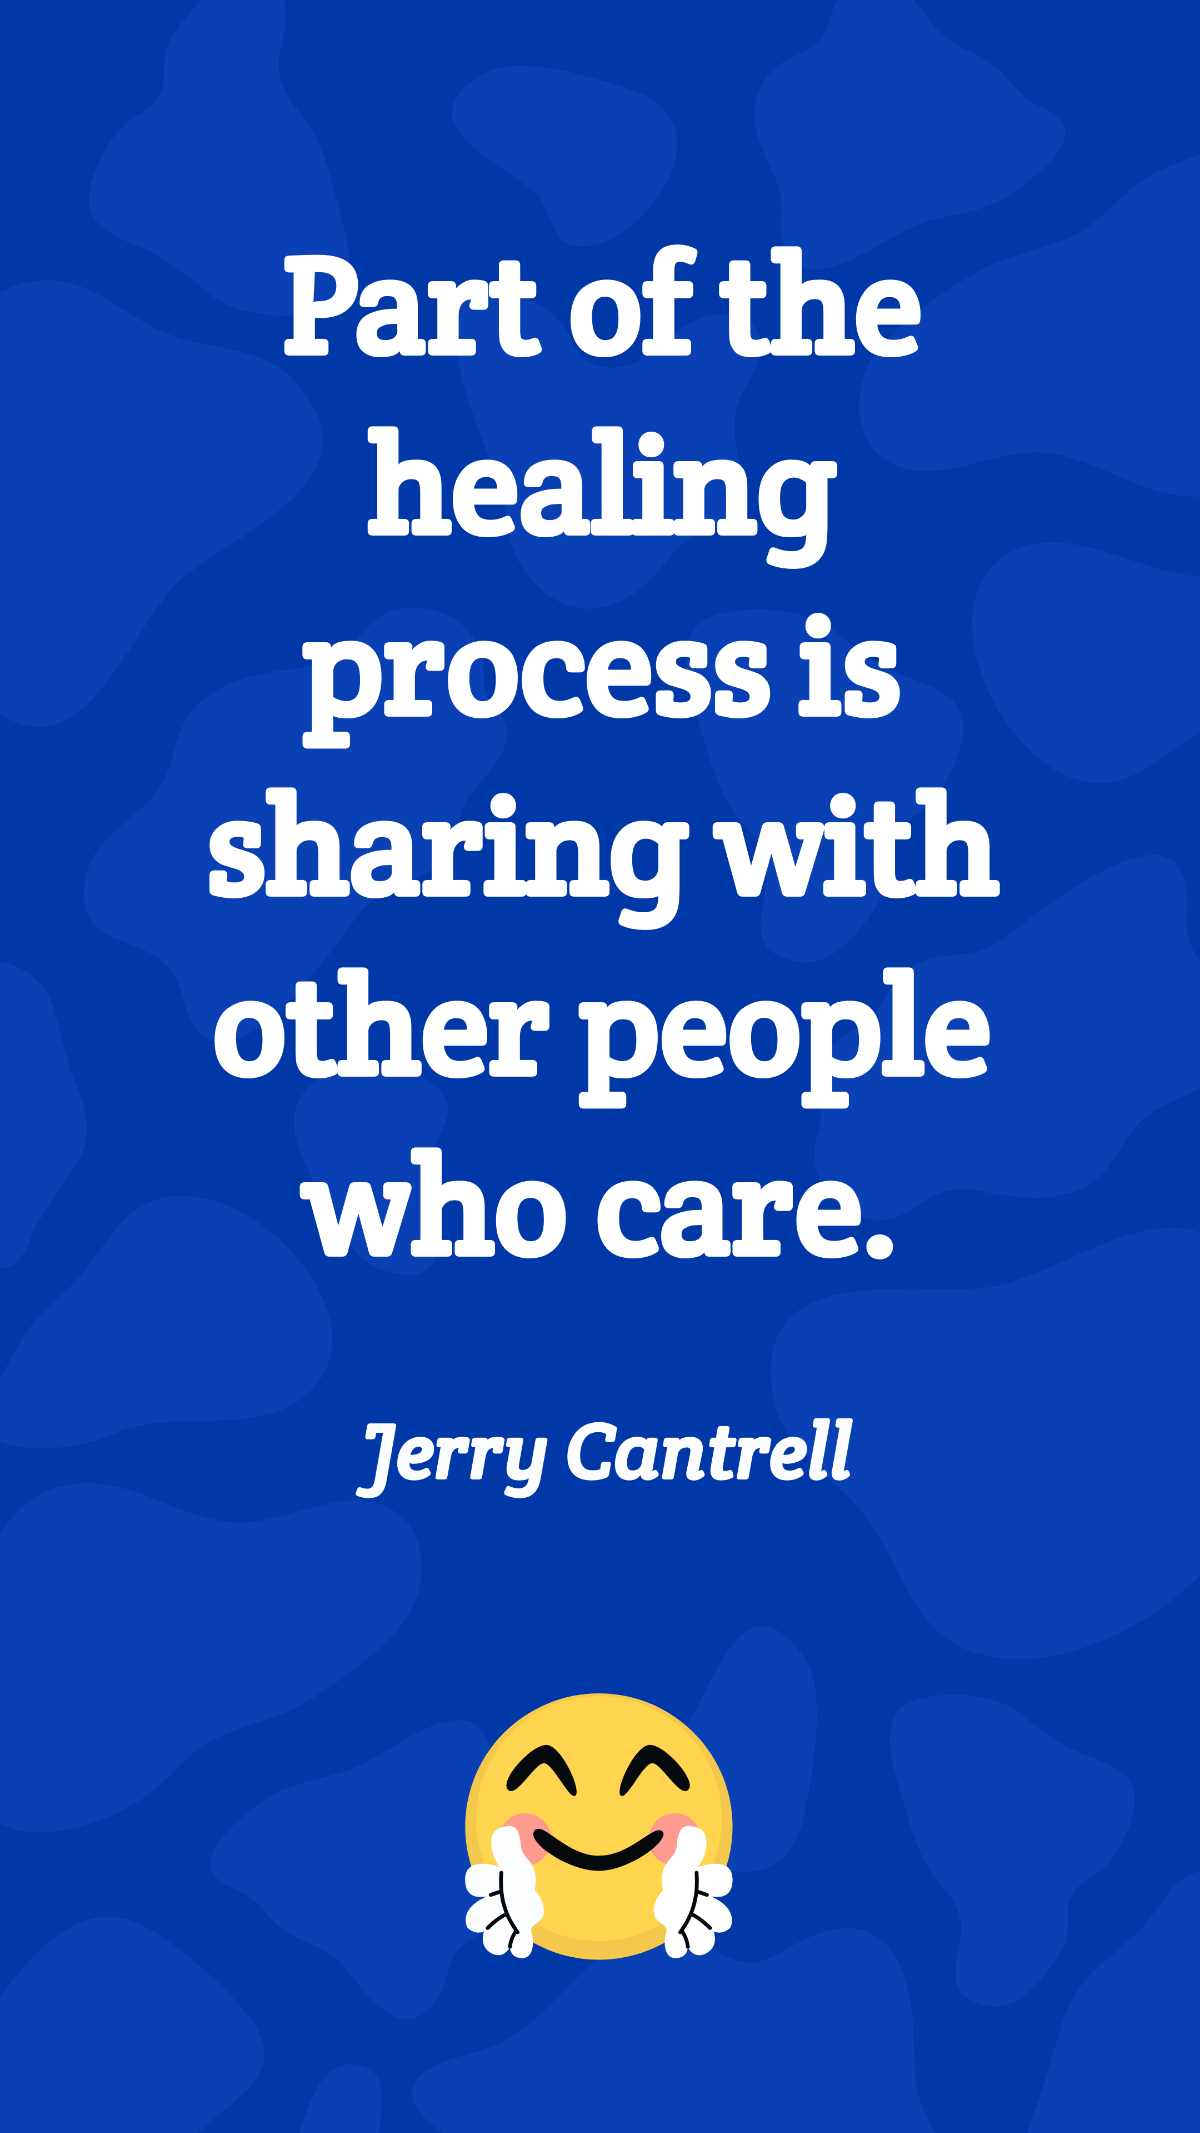 Jerry Cantrell - Part of the healing process is sharing with other people who care. Template